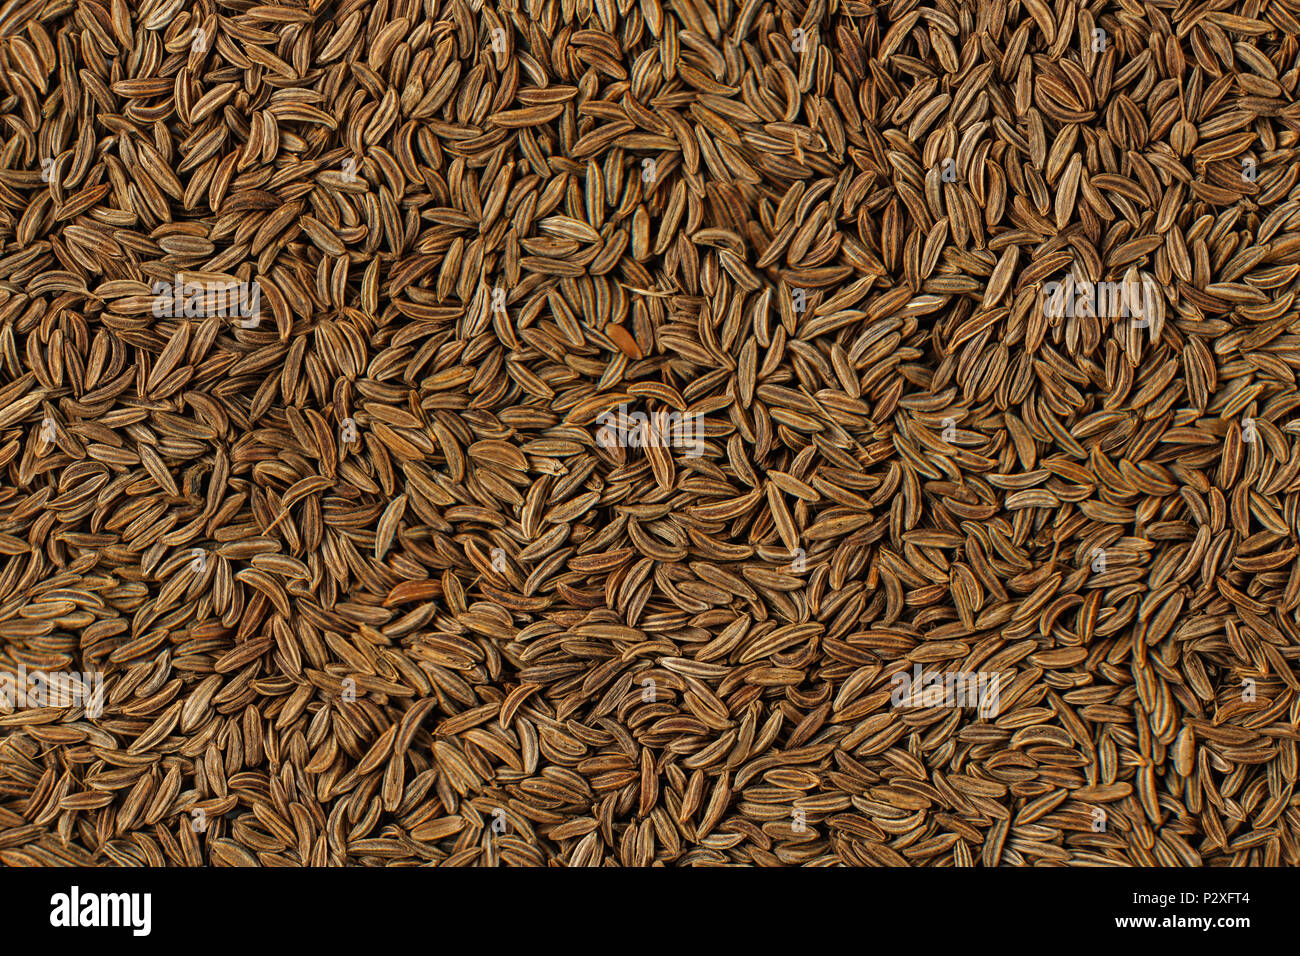 Closeup detail of caraway seeds (meridian fennel - Carum carvi) shot from above. Stock Photo